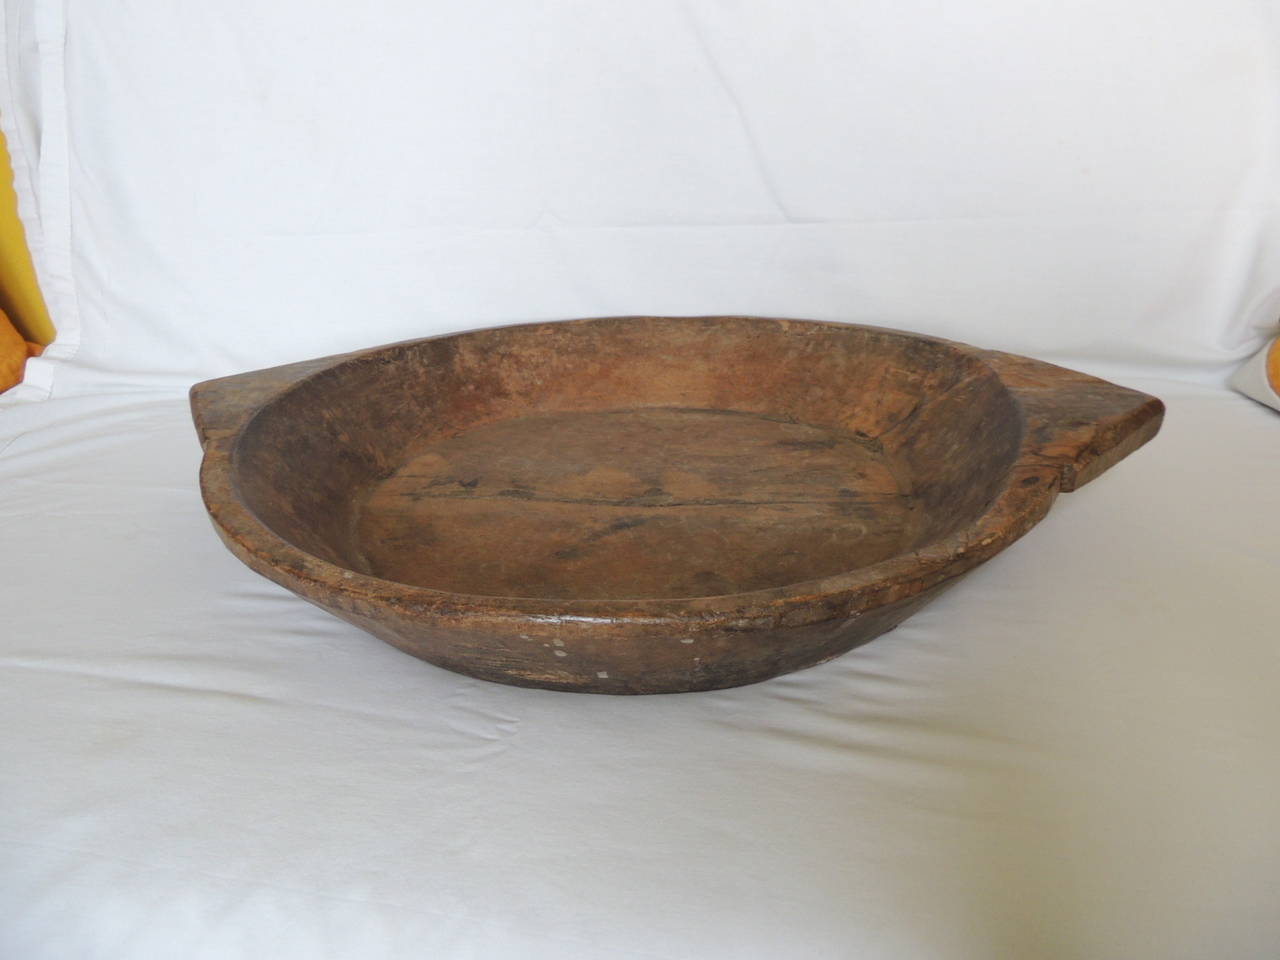 Large hand carved center piece, bowl with handles. Nice antique patina. (heavy)